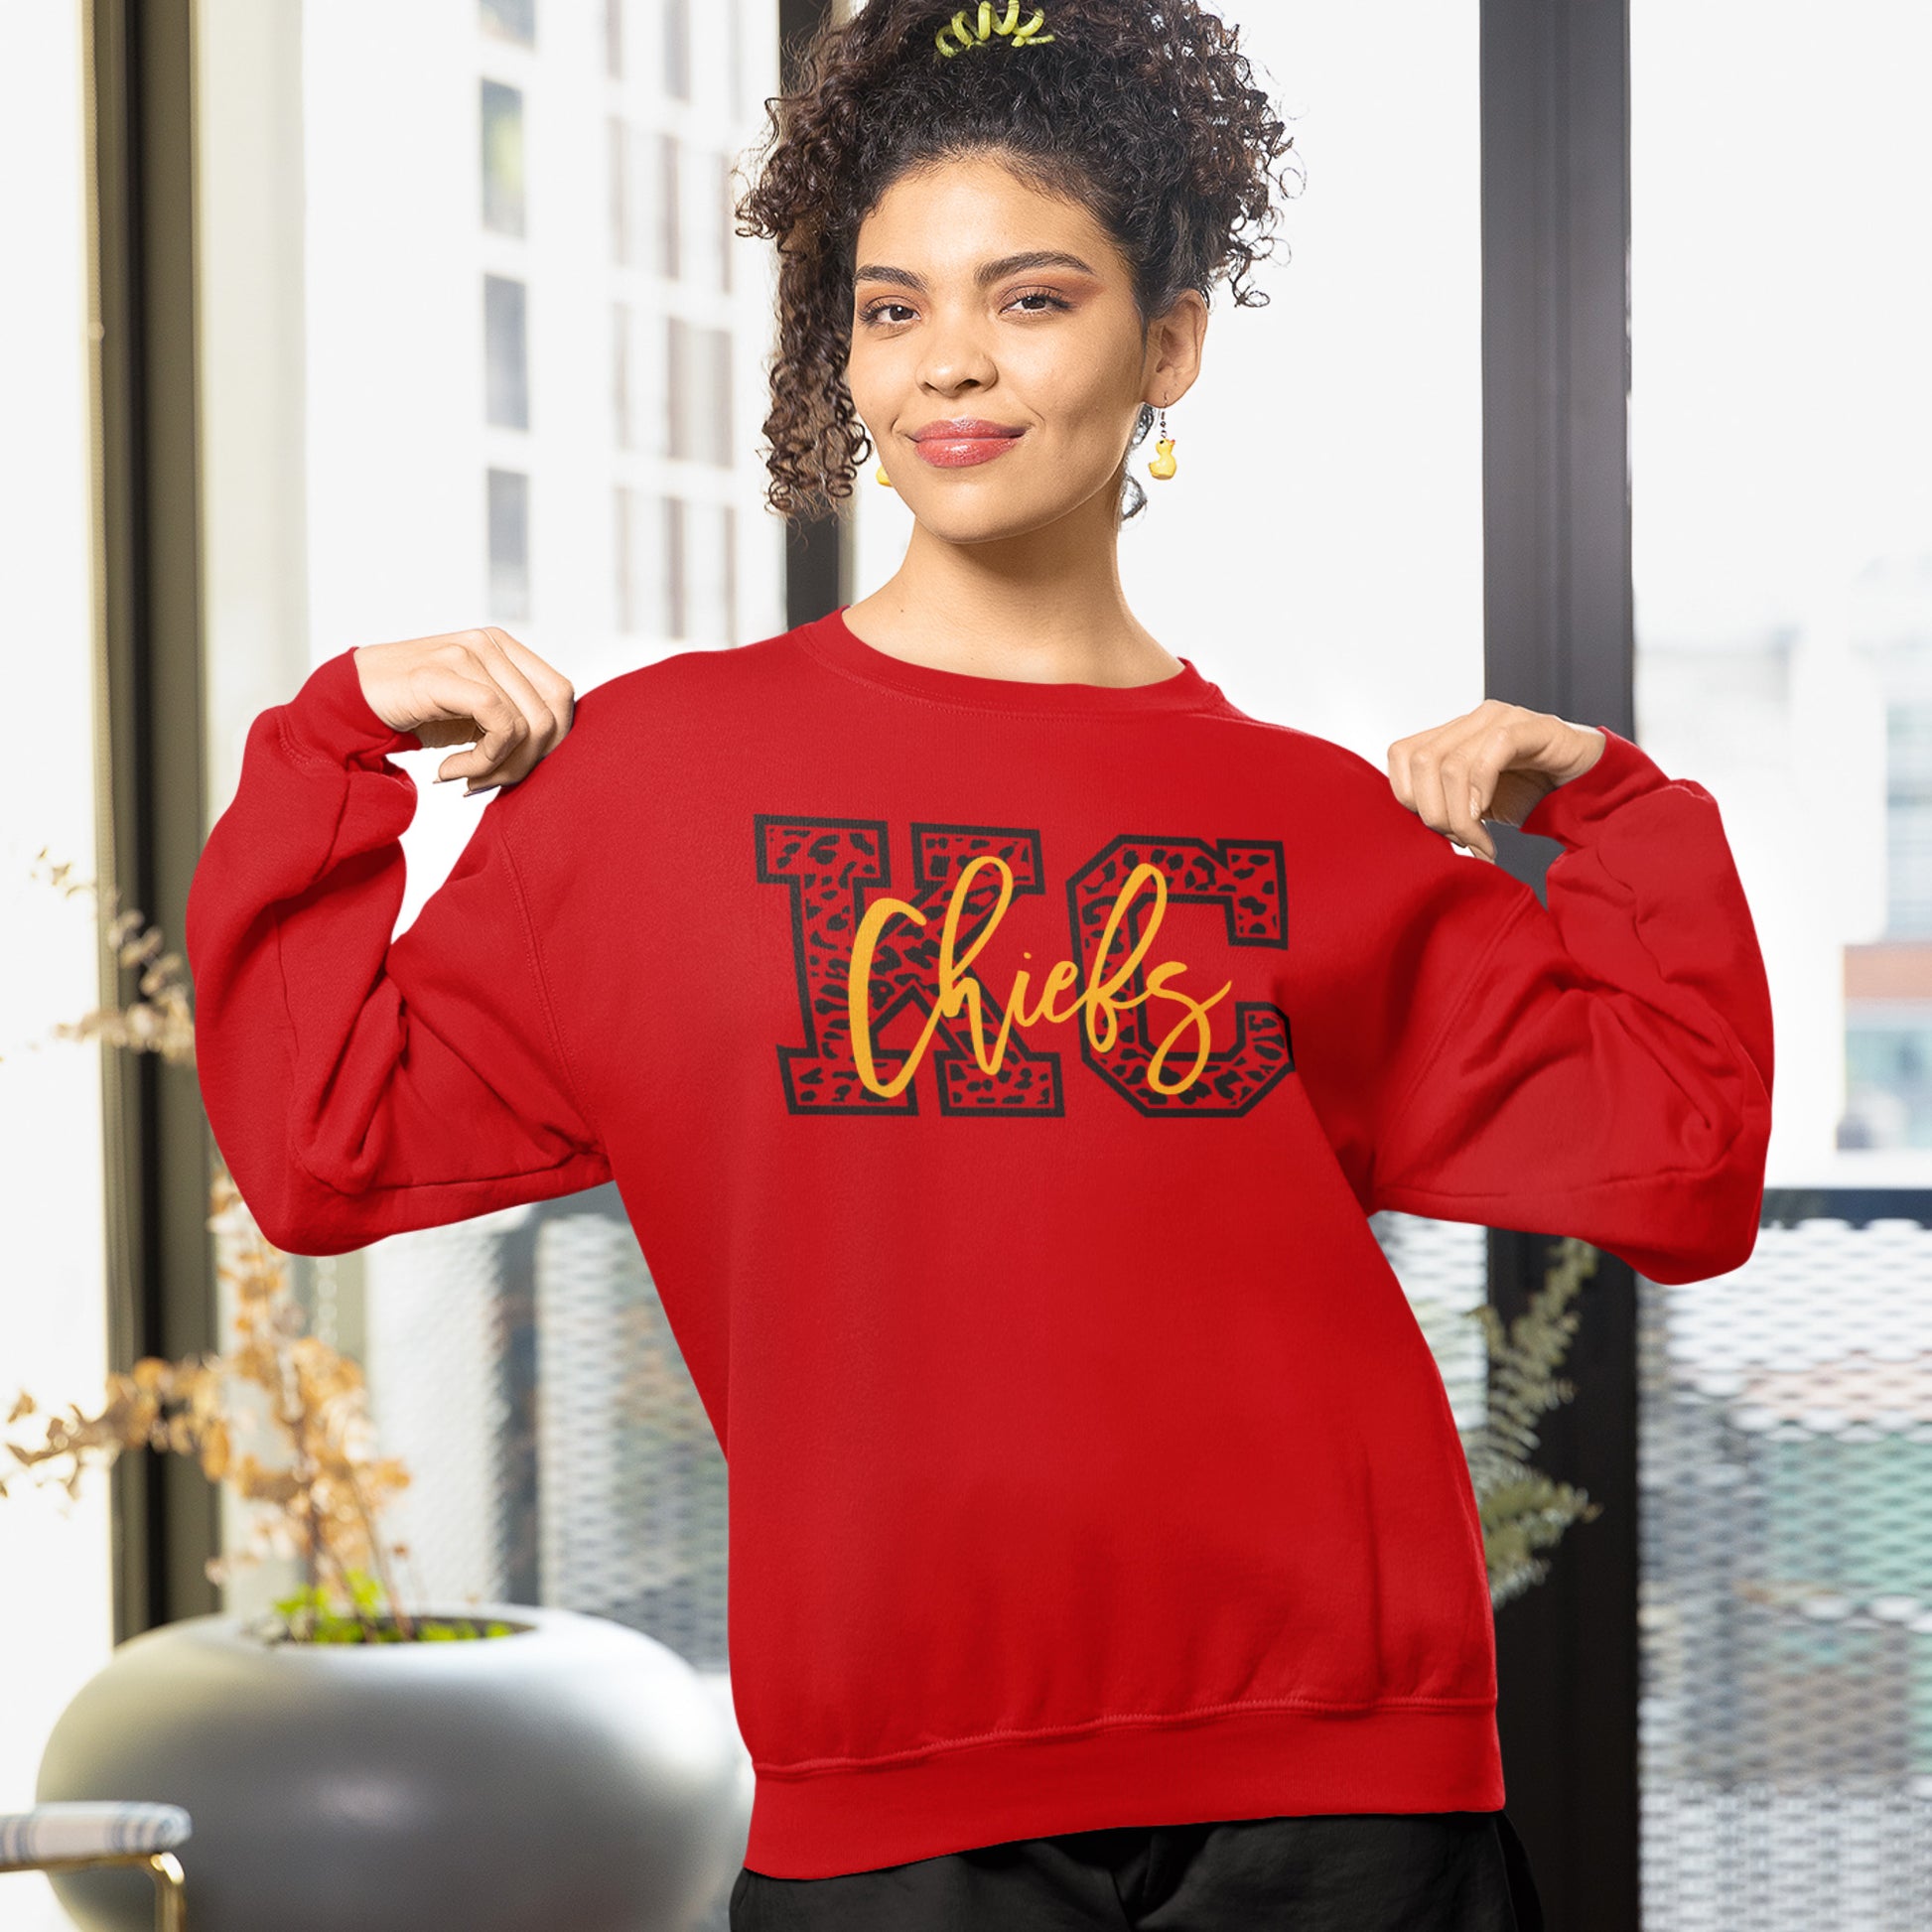 KC Swag Kansas City Chiefs Black & Gold Cheetah KC on a Red Crewneck Sweatshirt worn by female model pointing at her chest in a high-rise apartment